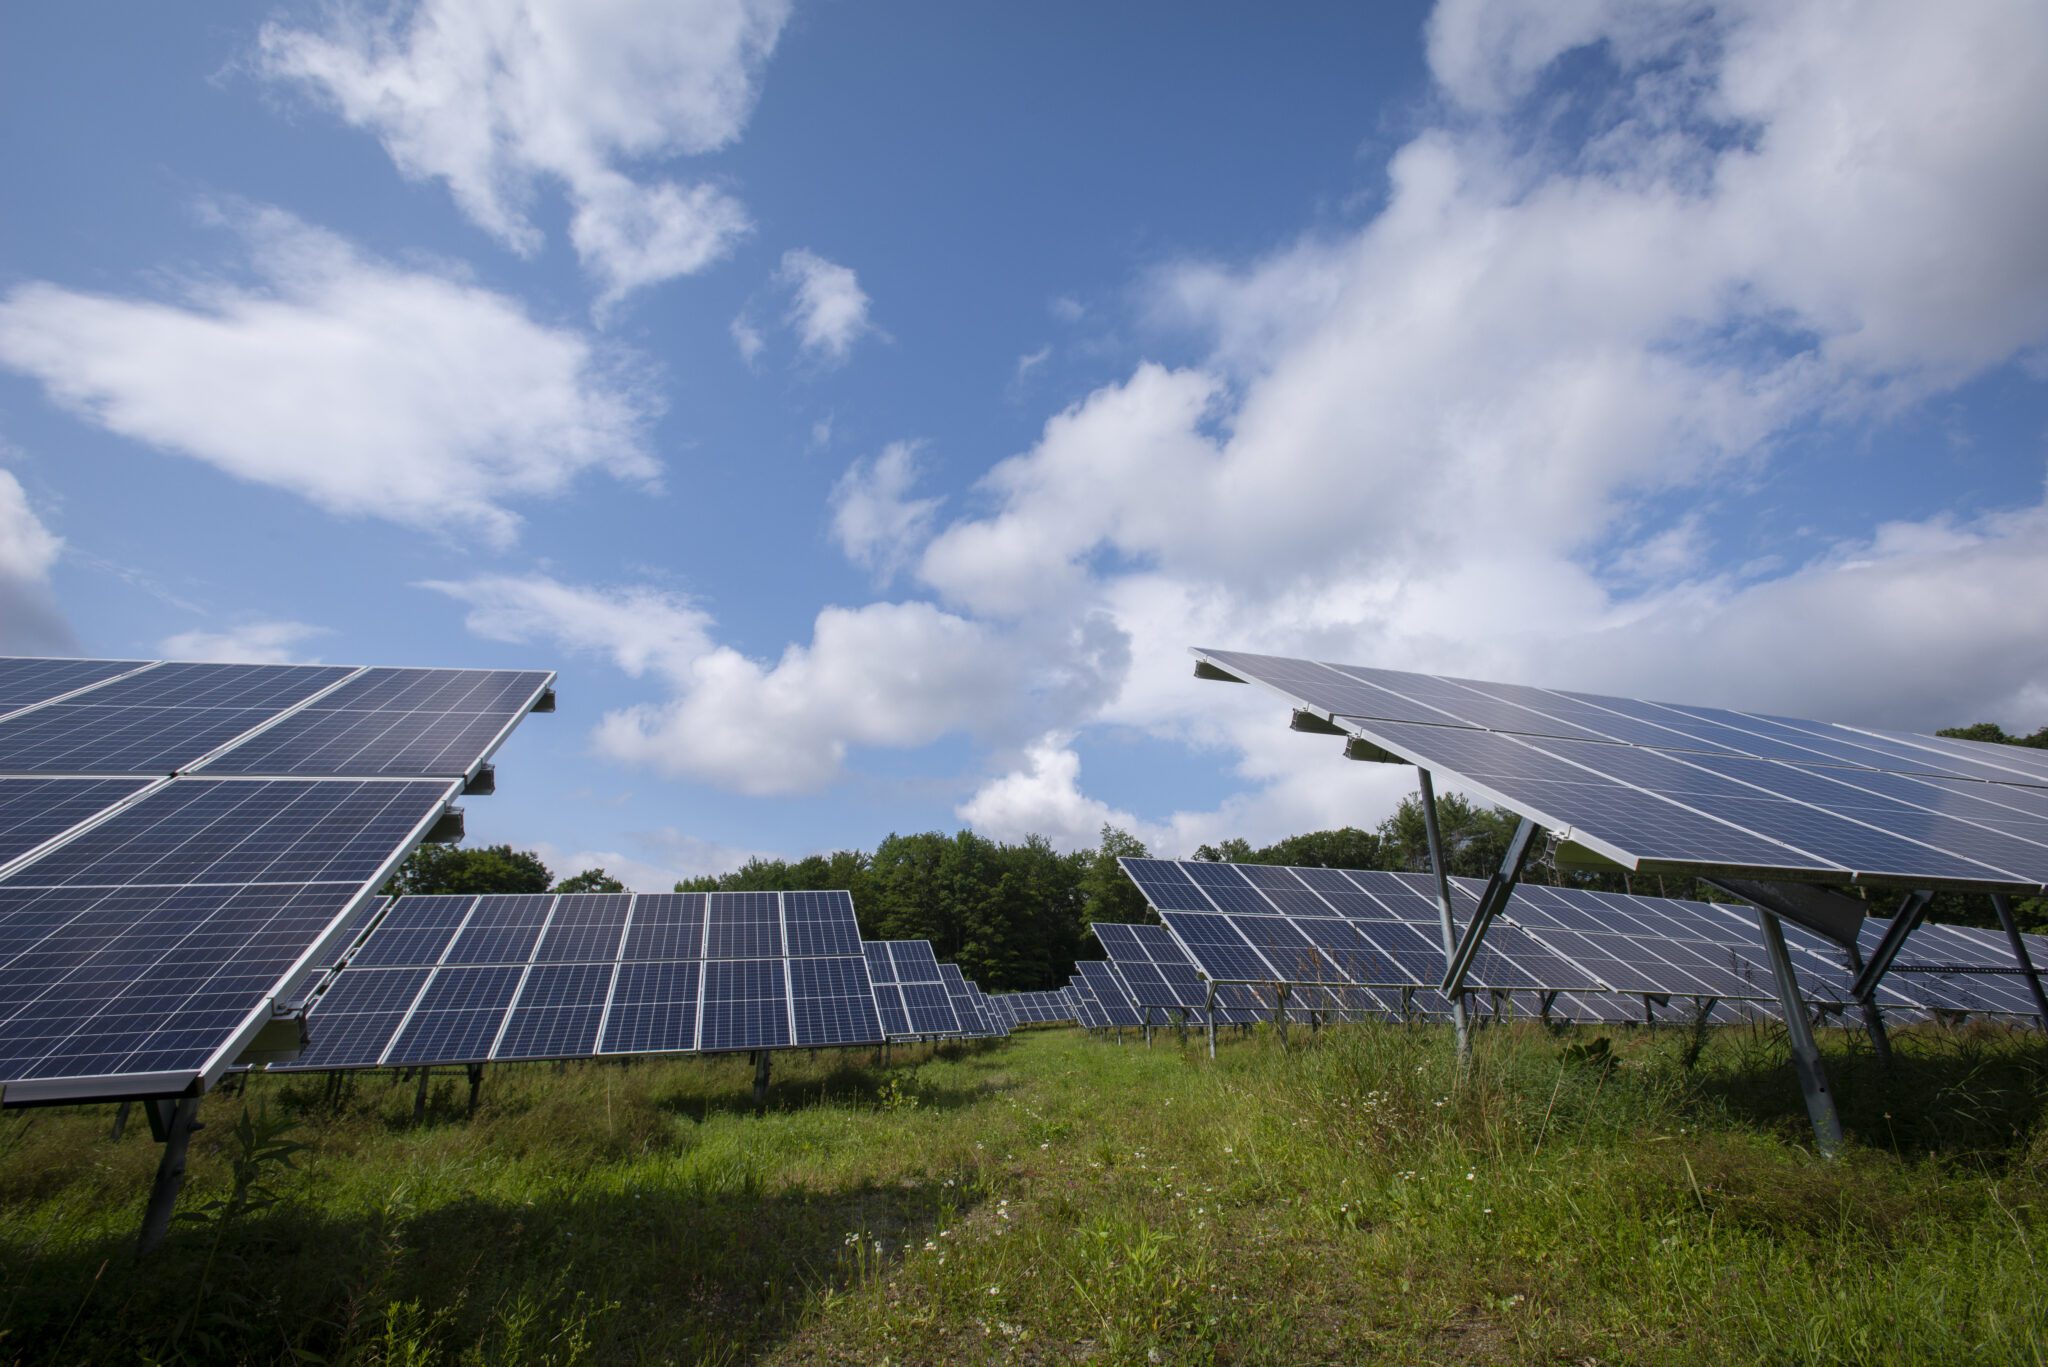 How a Solar Project Affects the Landscape